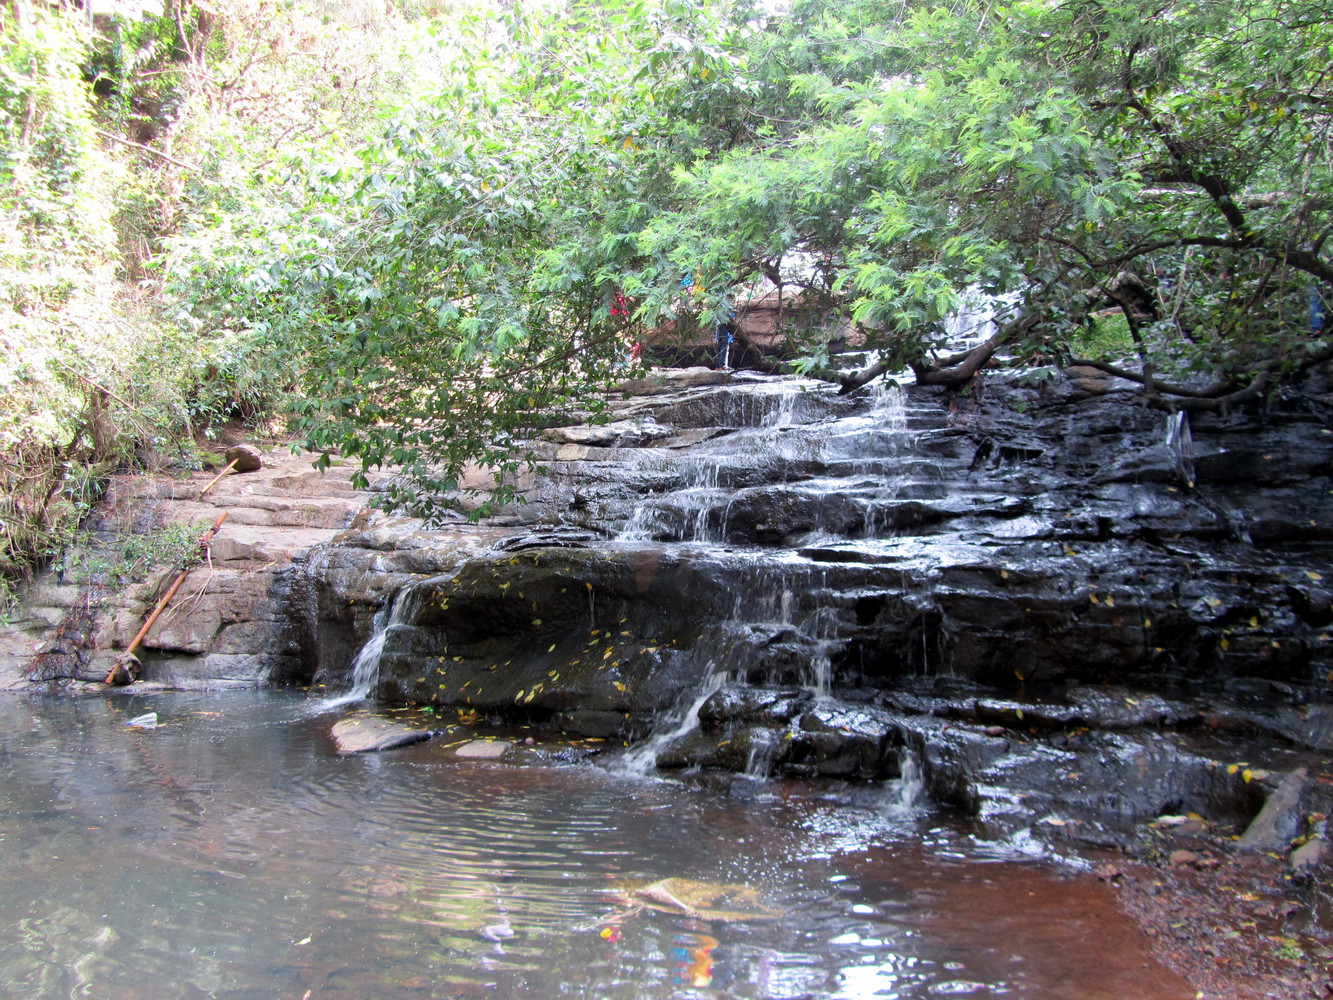 A waterfall descending a series of many small rock steps